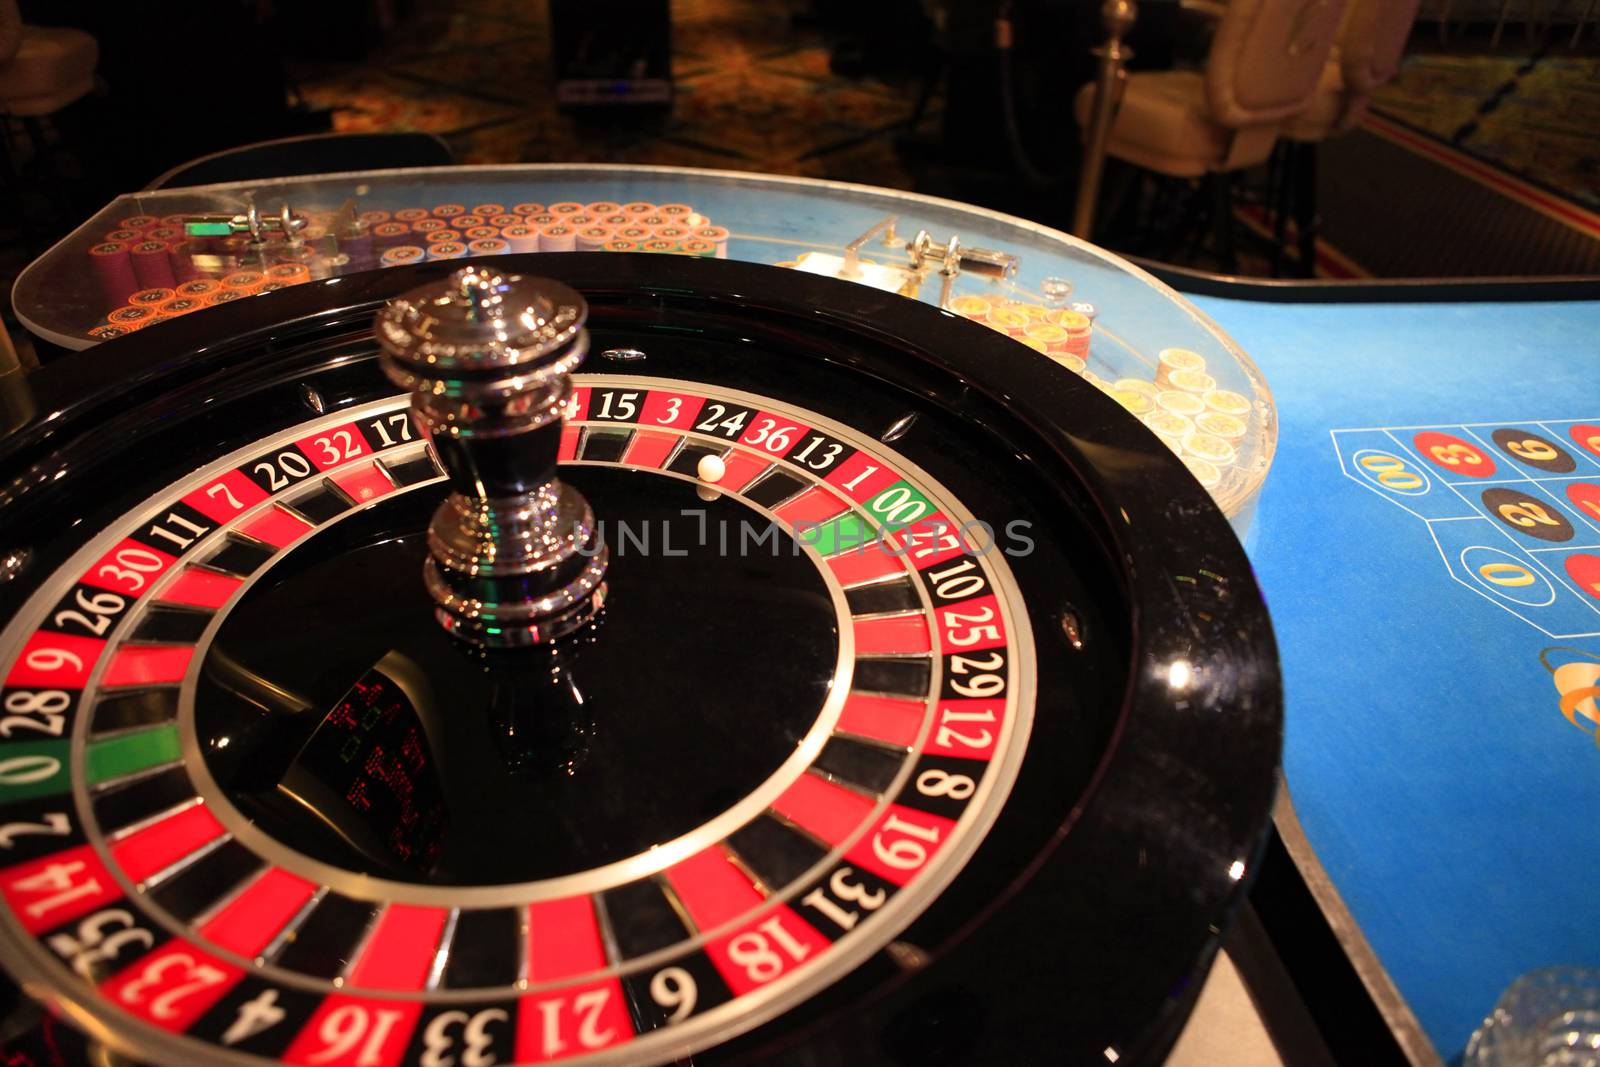 Roulette table and gambling chips in casino